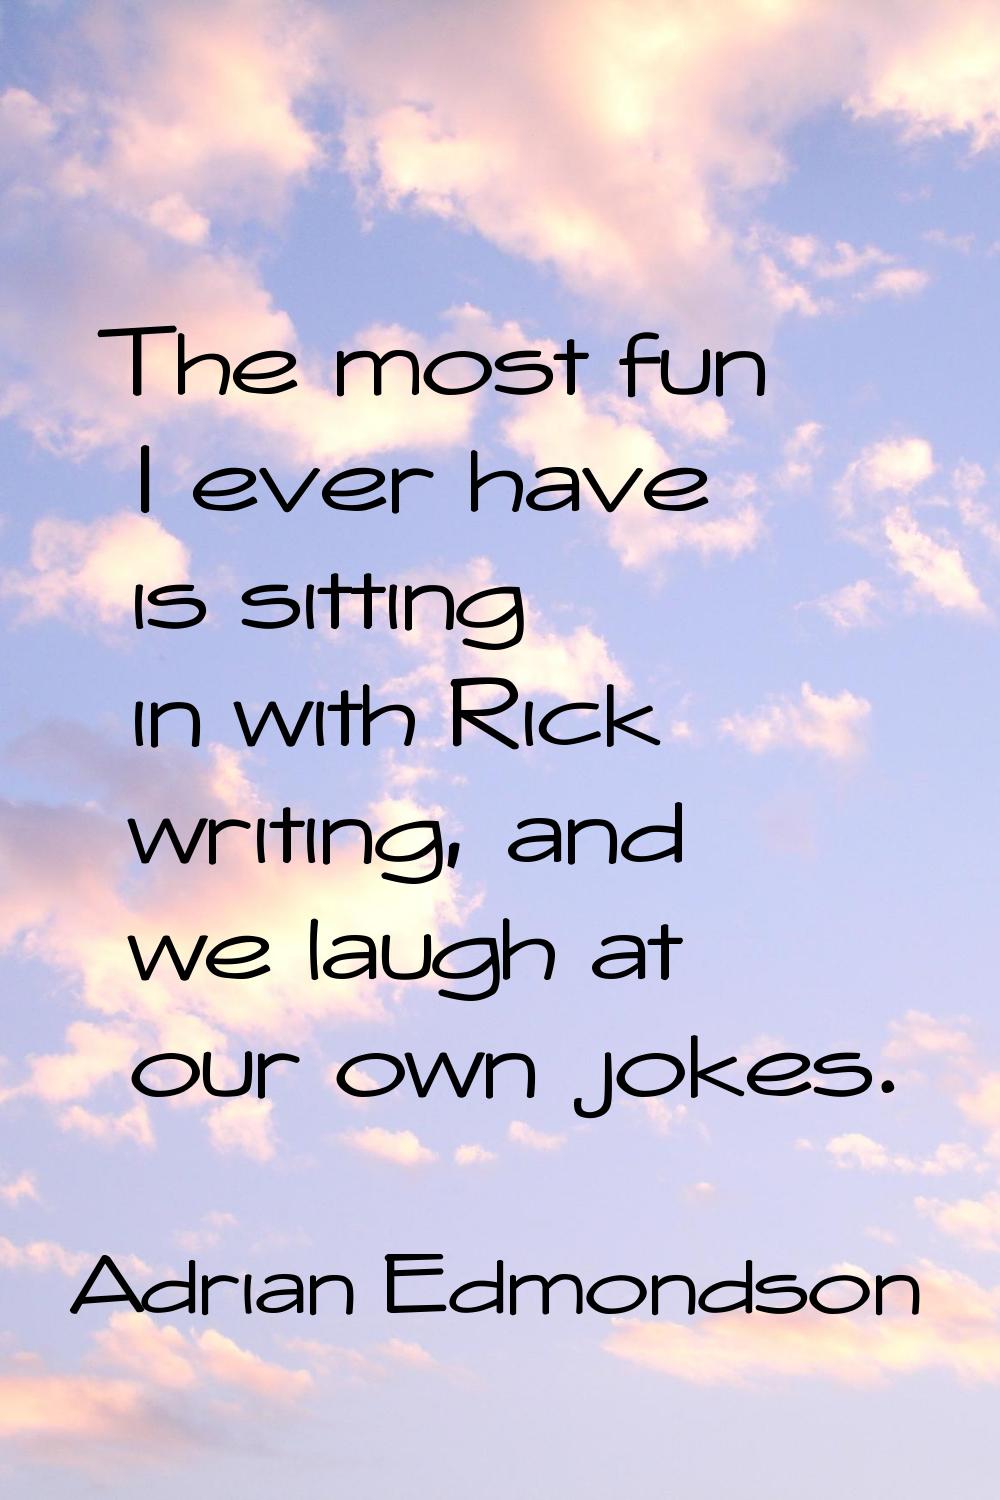 The most fun I ever have is sitting in with Rick writing, and we laugh at our own jokes.